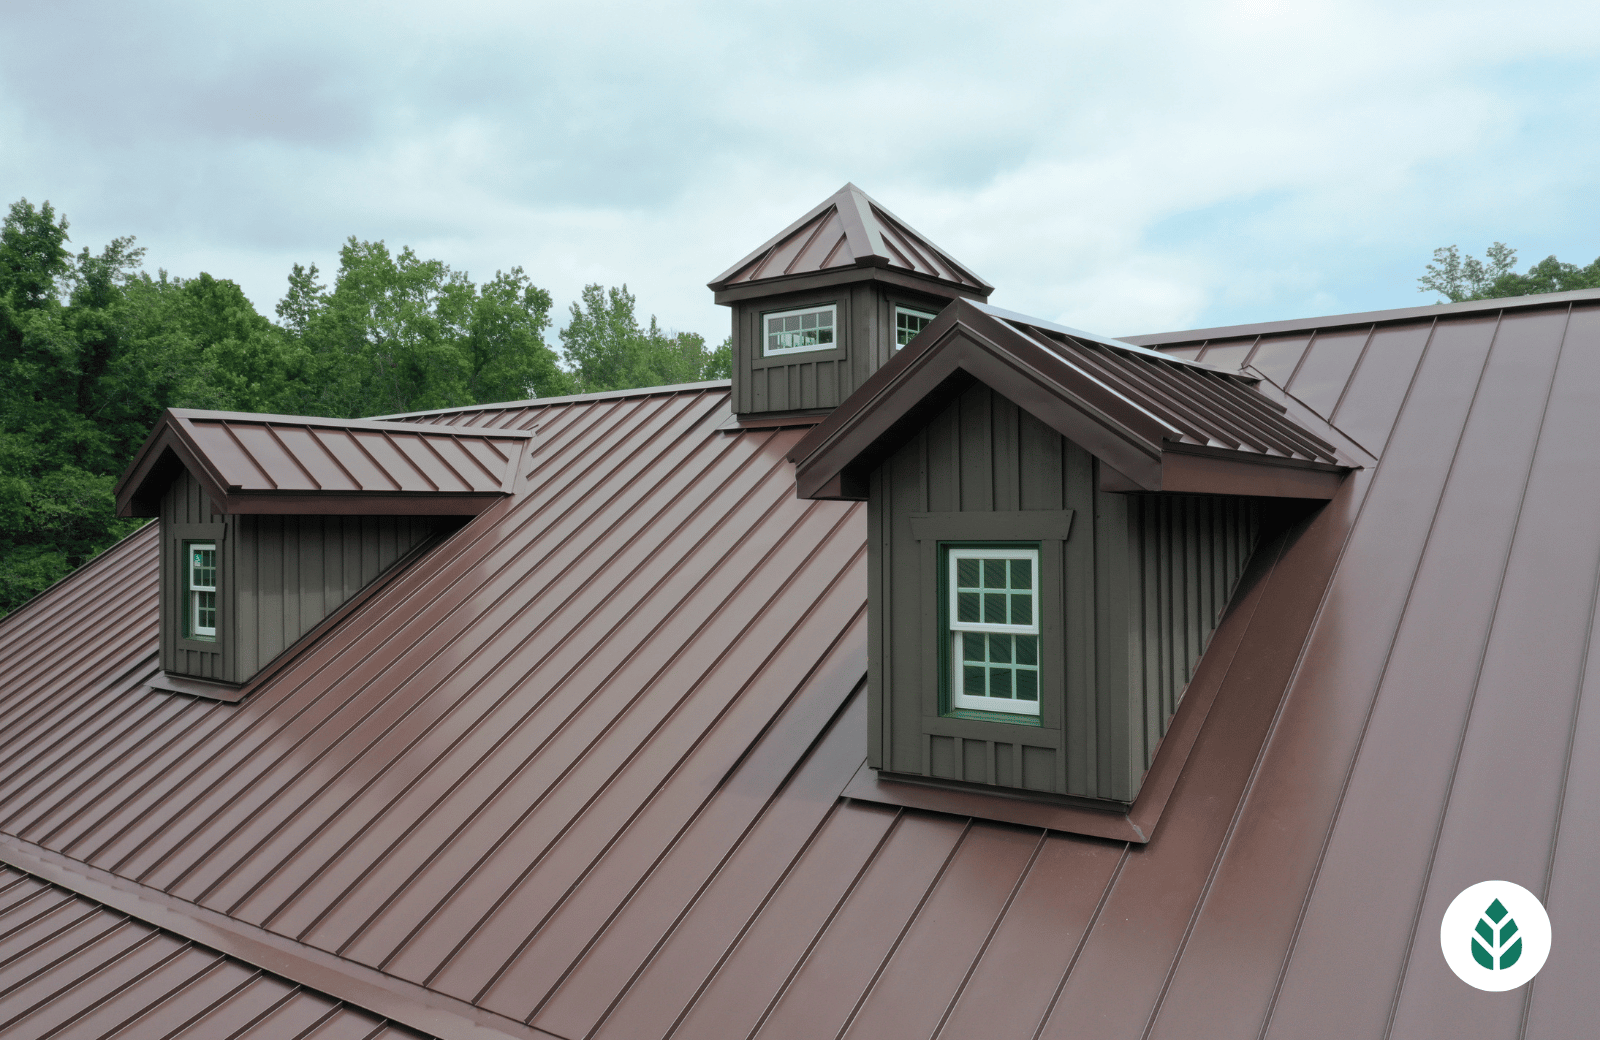 standing-seam-metal-roof-cost-homeowners-guide-2023-ecowatch